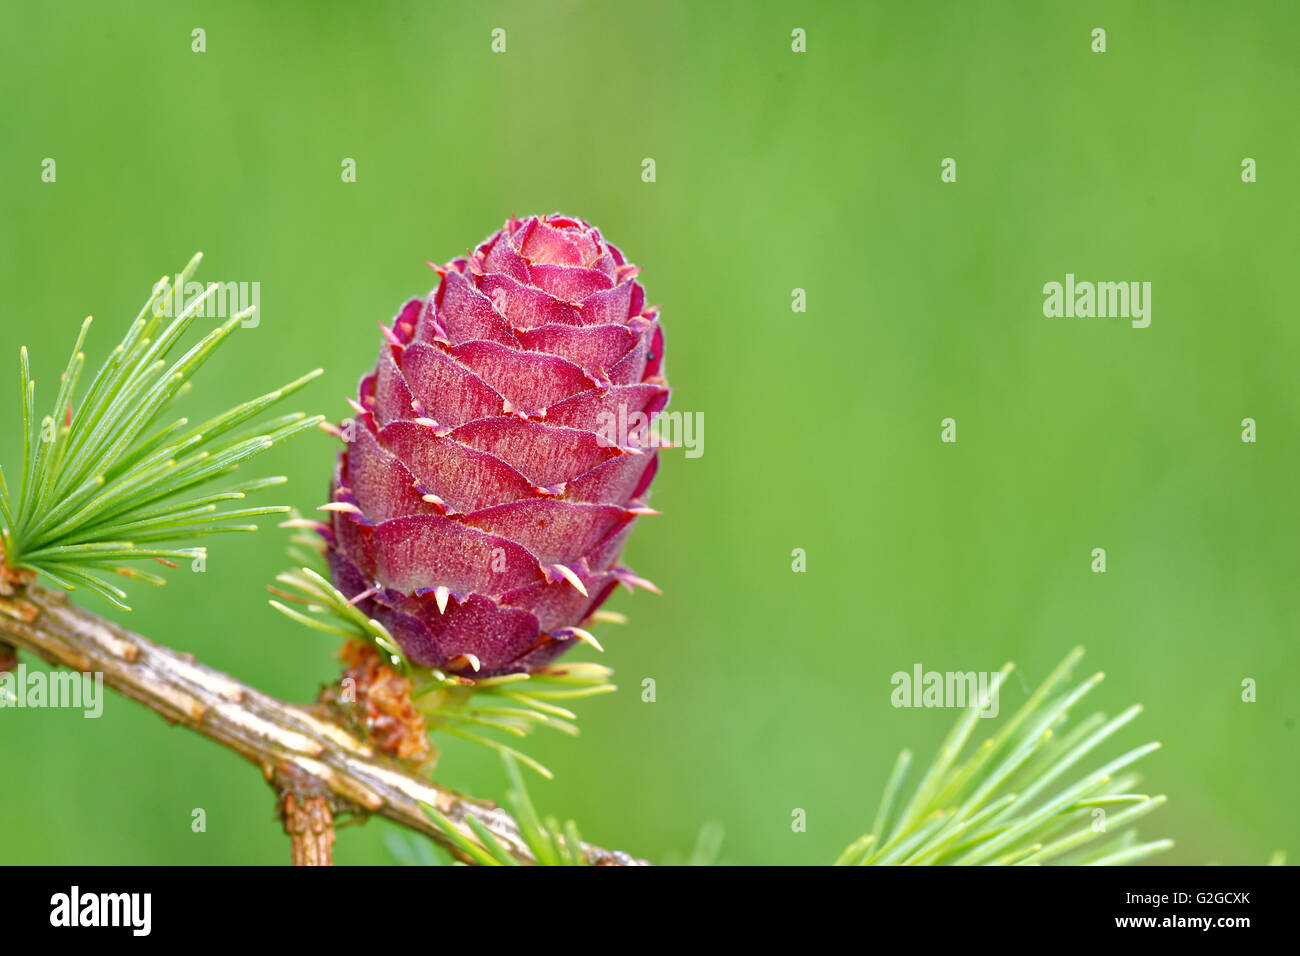 Ovulate cone of larch tree in spring, end of May. Stock Photo